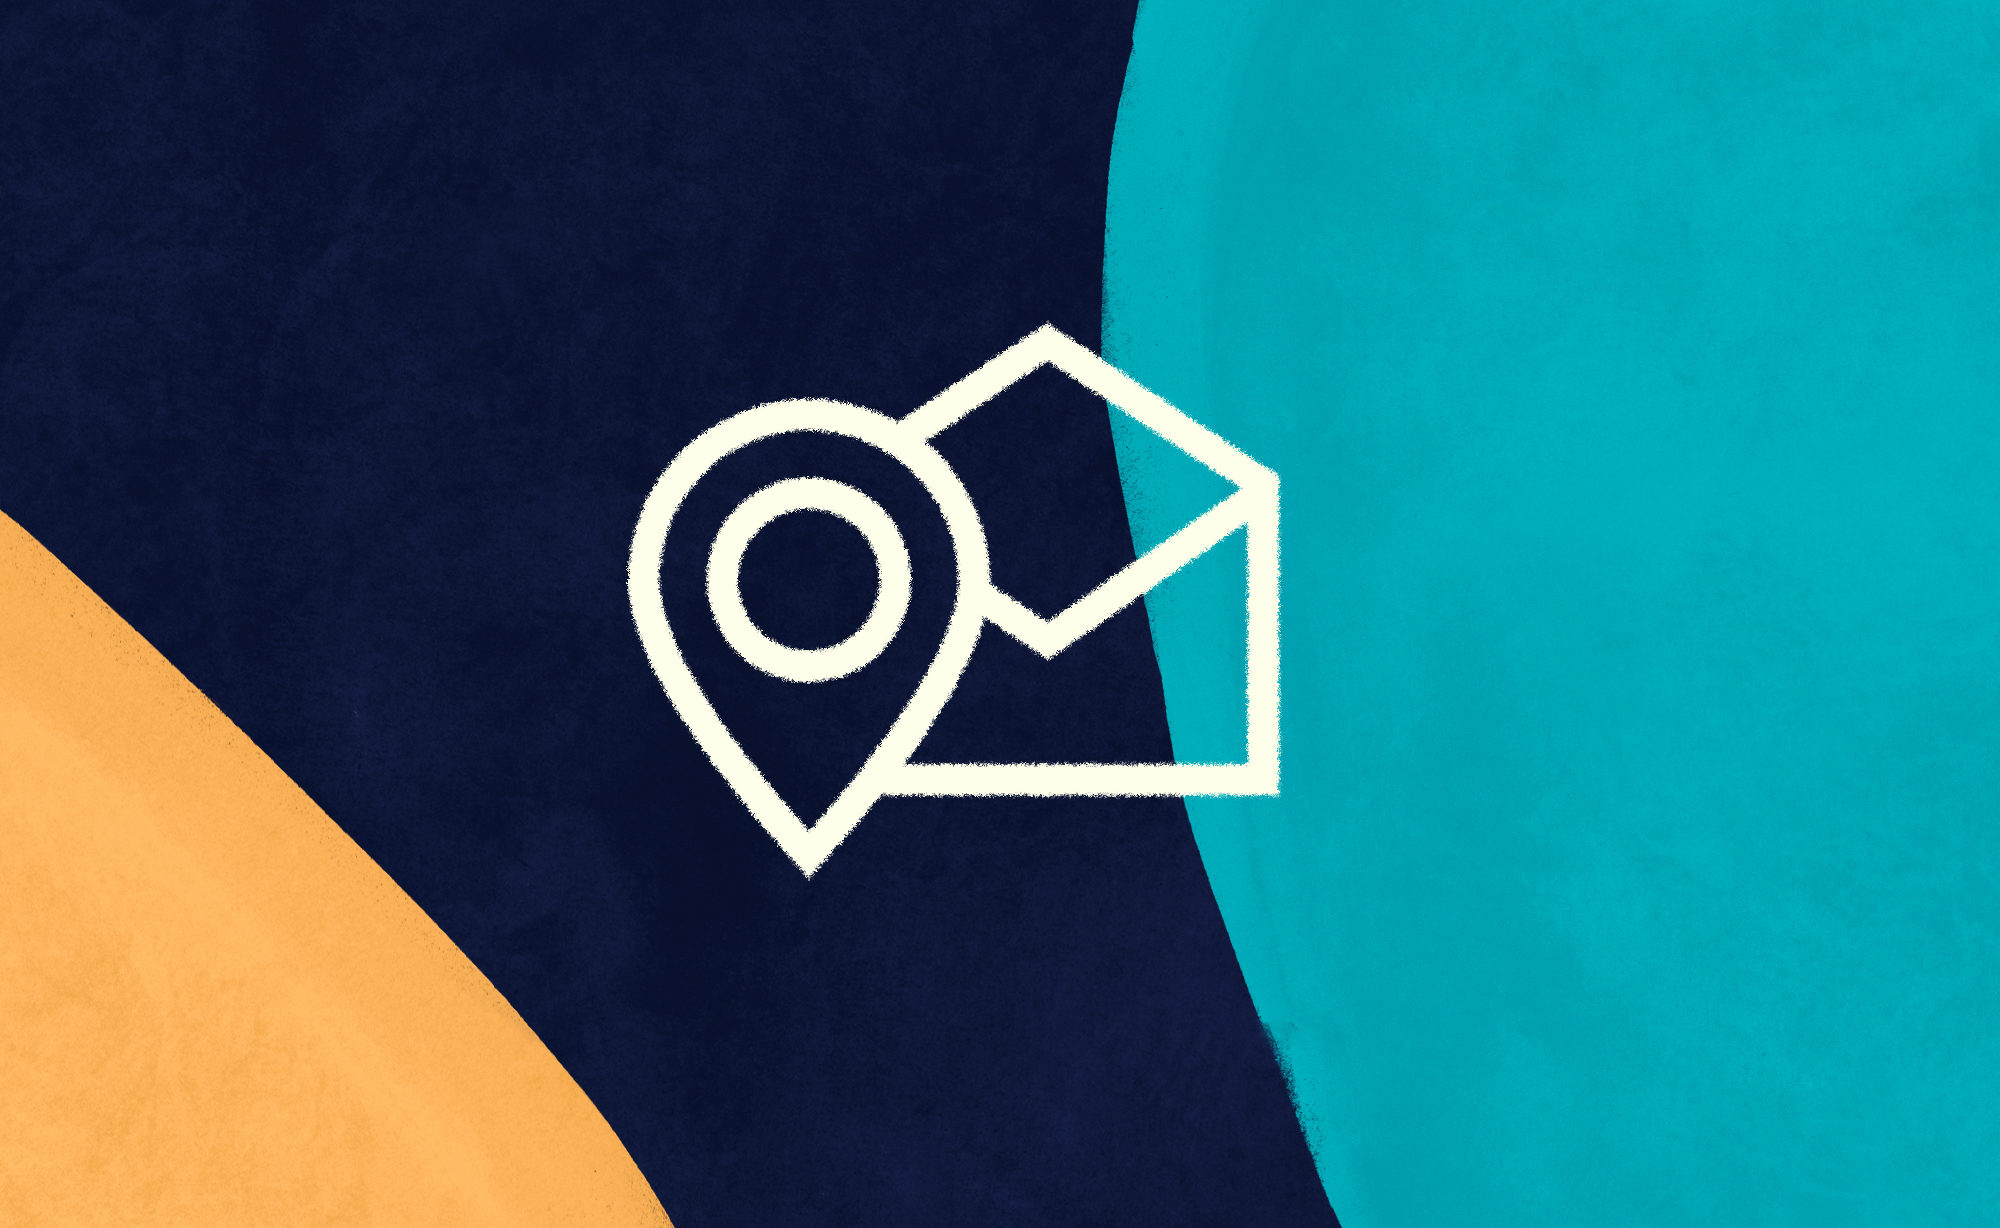 Location pointer and envelope icon on top of textured navy blue and turquoise and orange background 